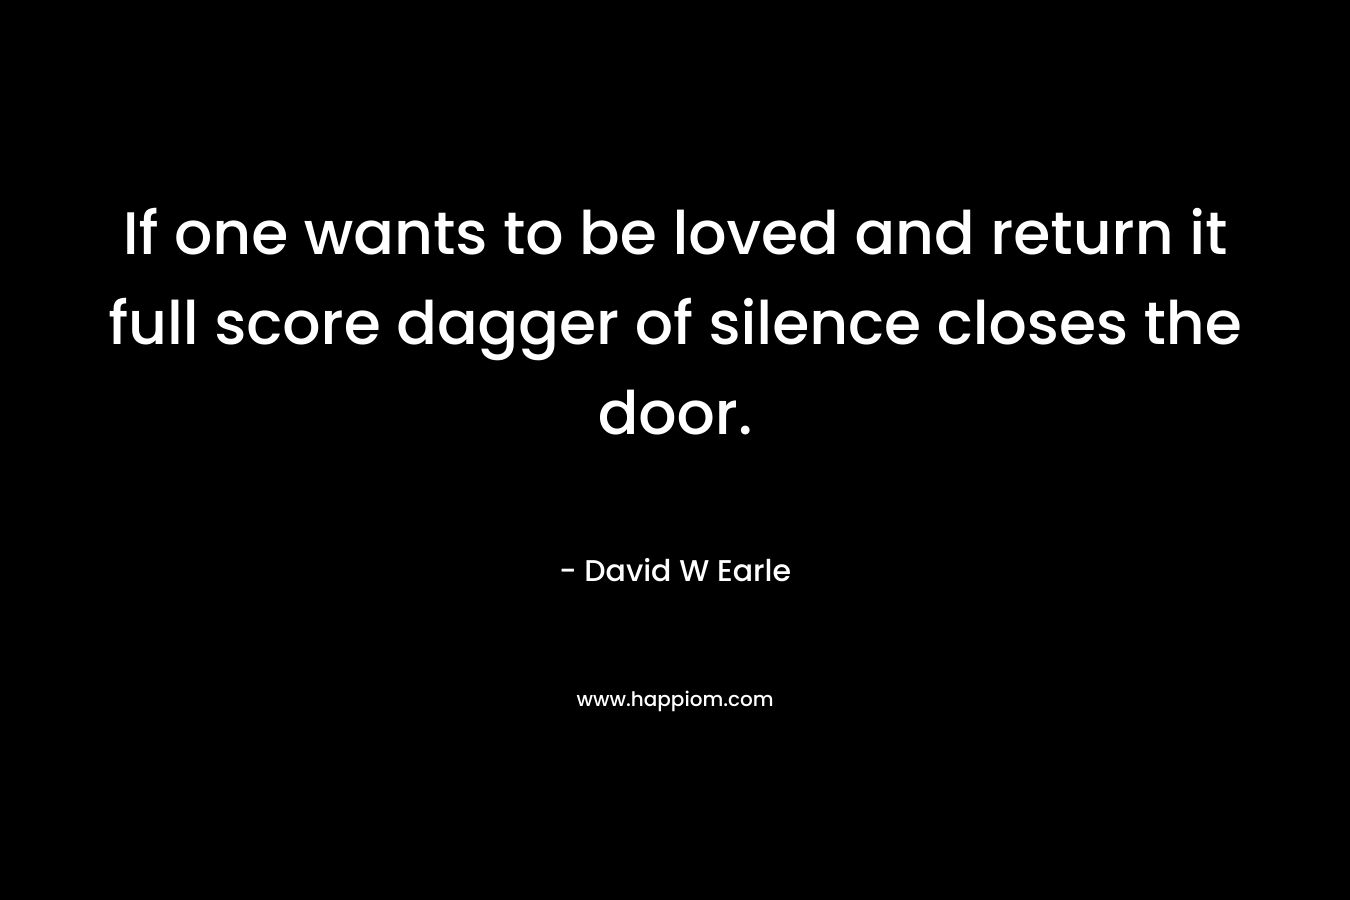 If one wants to be loved and return it full score dagger of silence closes the door. – David W Earle